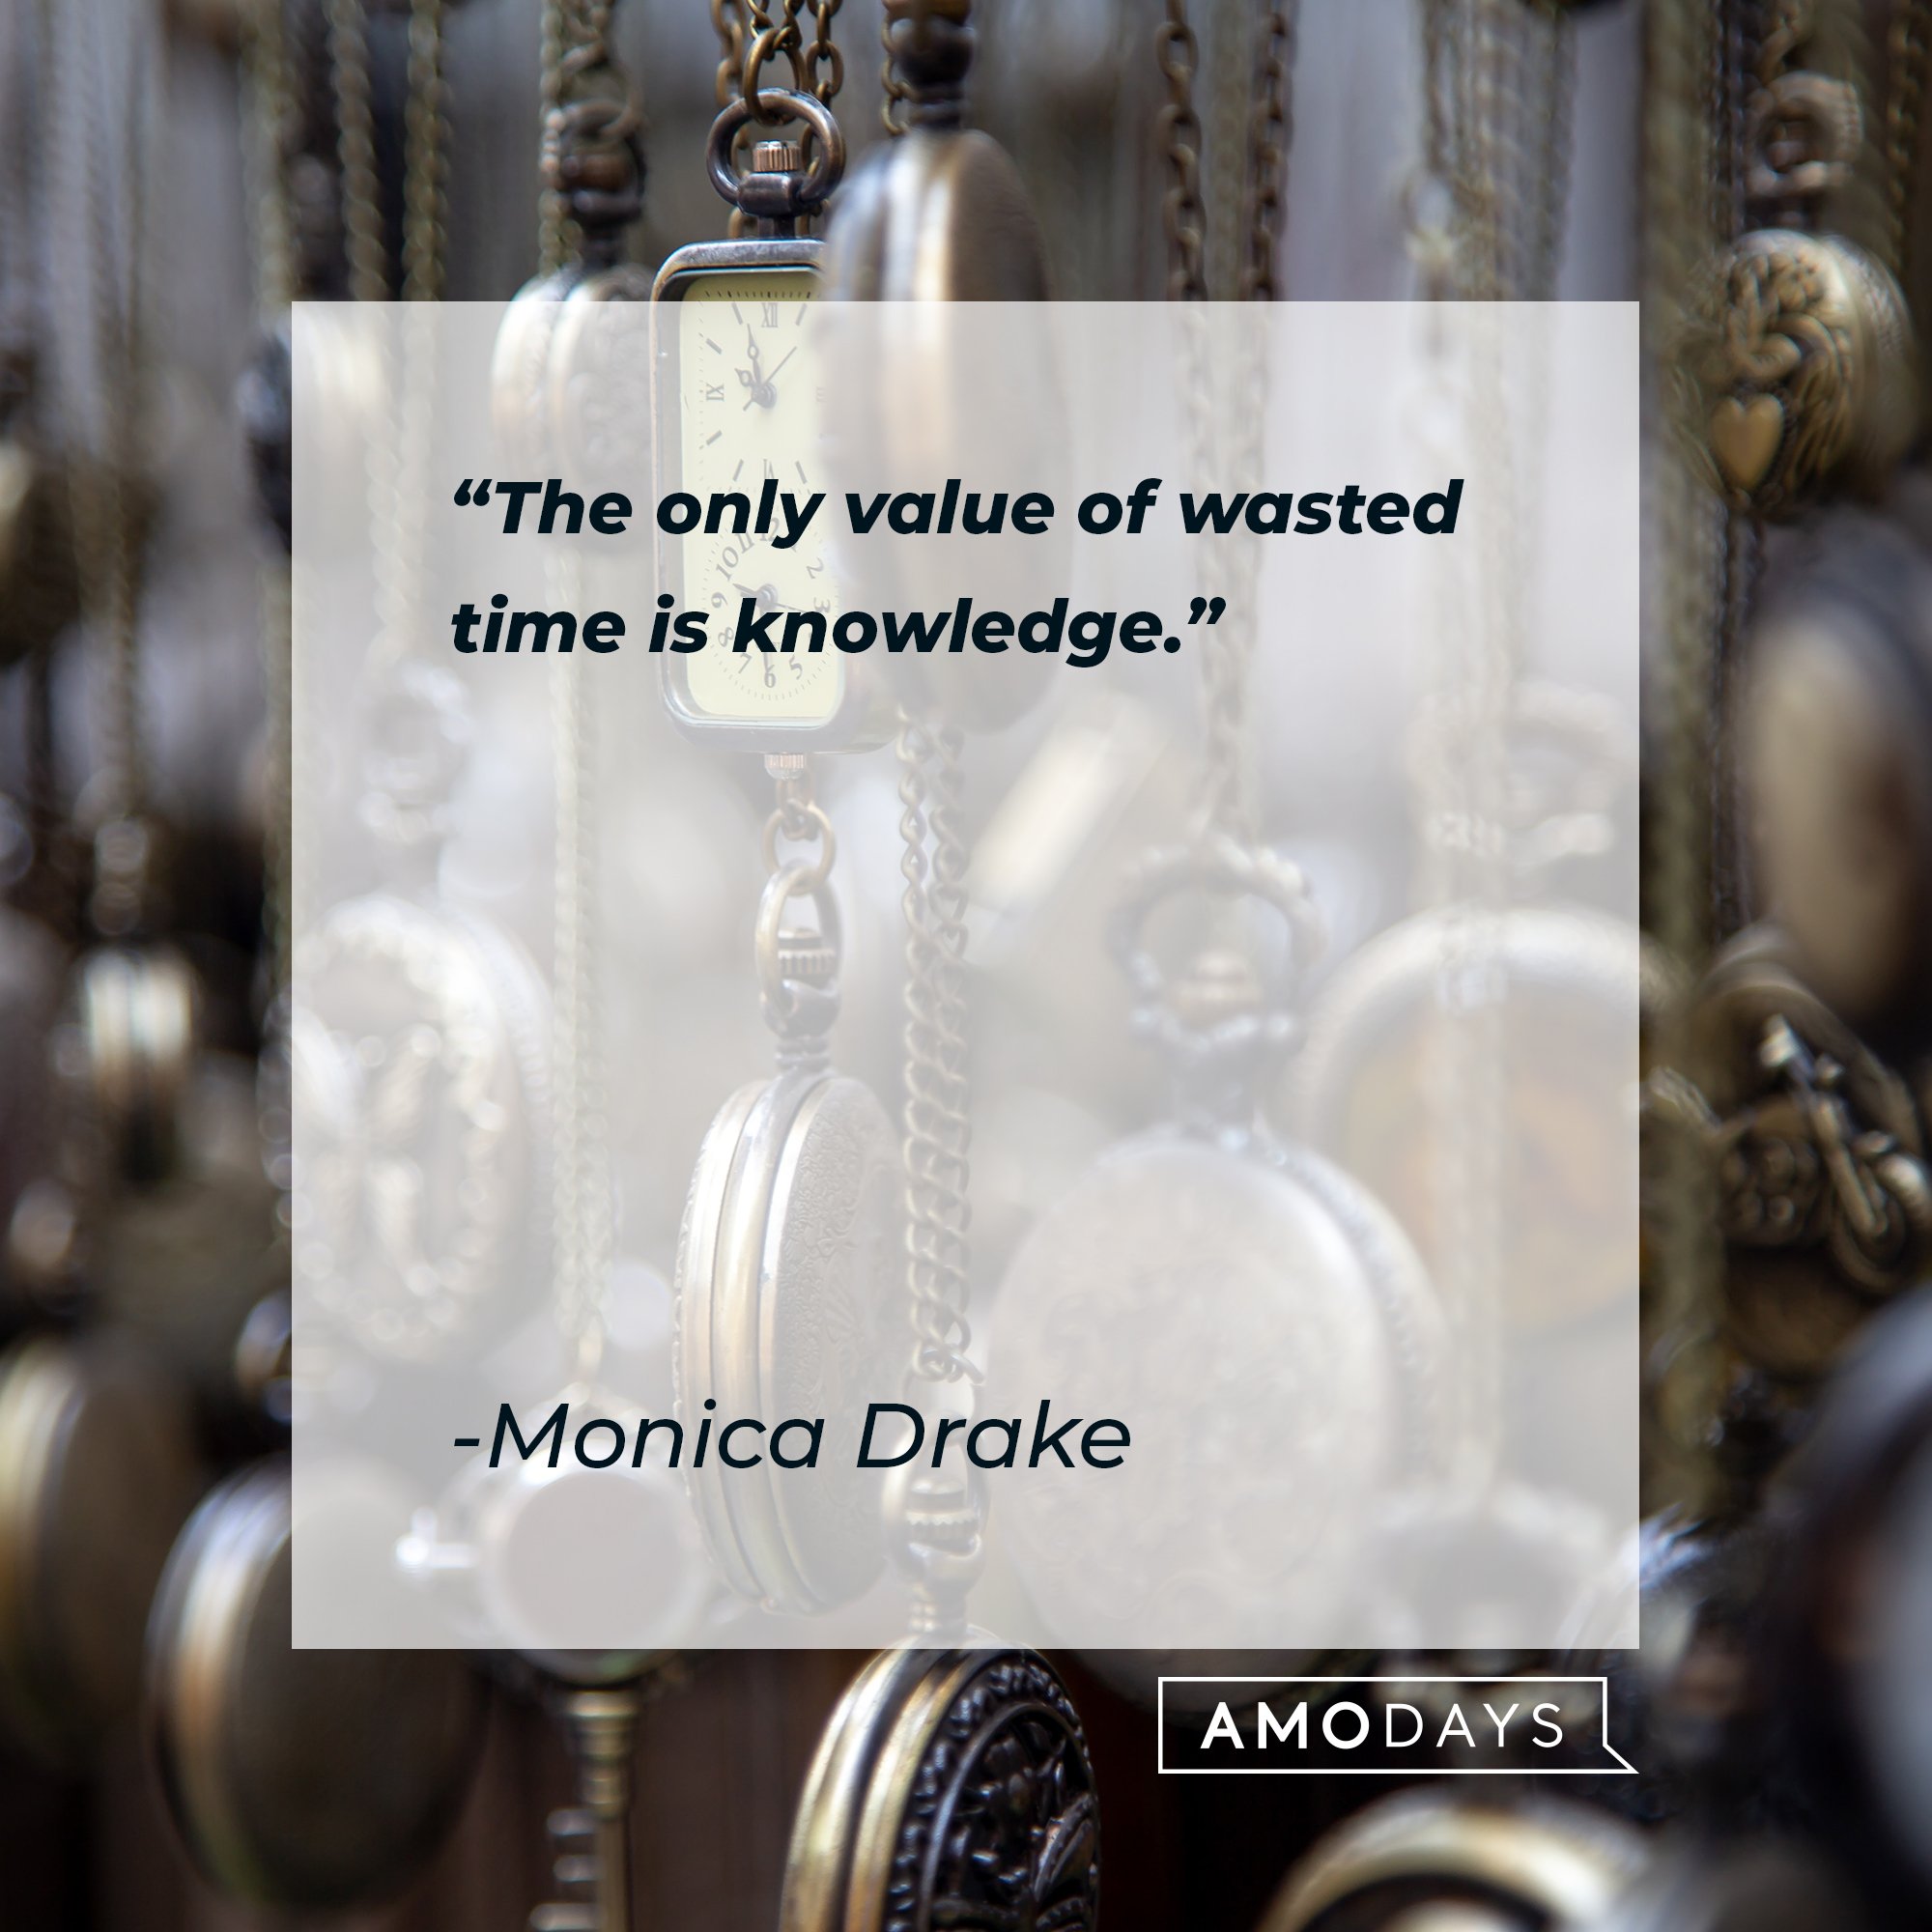 Monica Drake’s quote: "The only value of wasted time is knowledge." | Image: AmoDays   